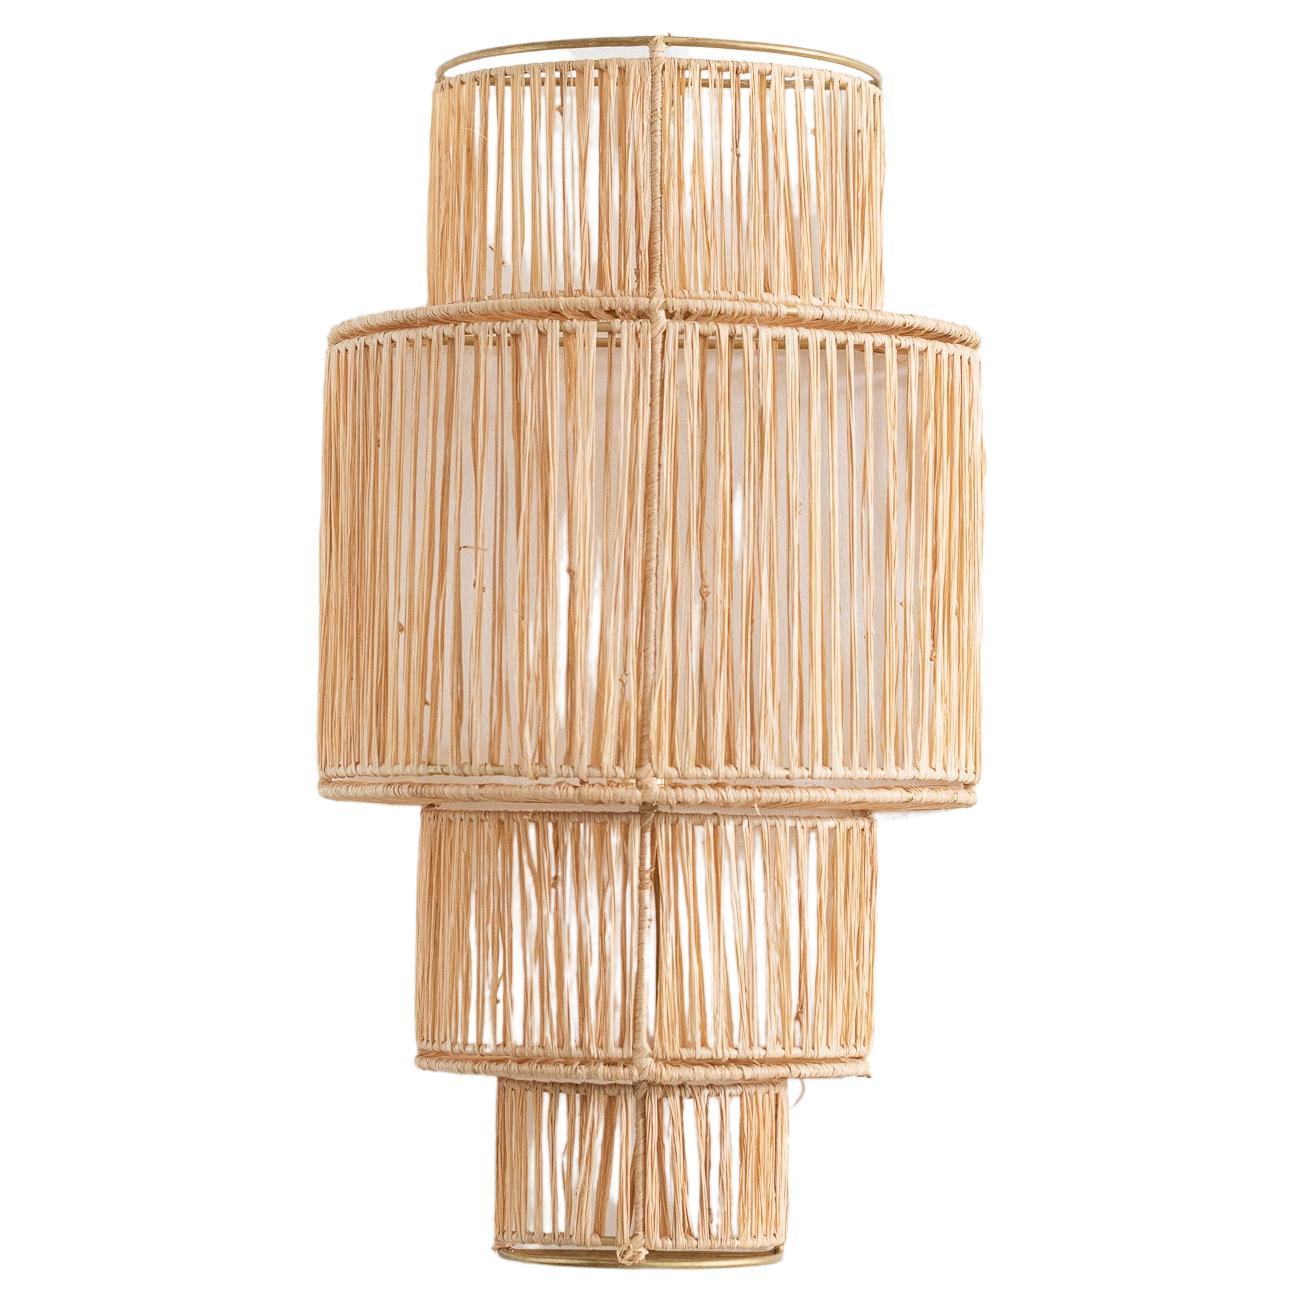 Honoré Deco Four Tiered Wall Shade For Sale